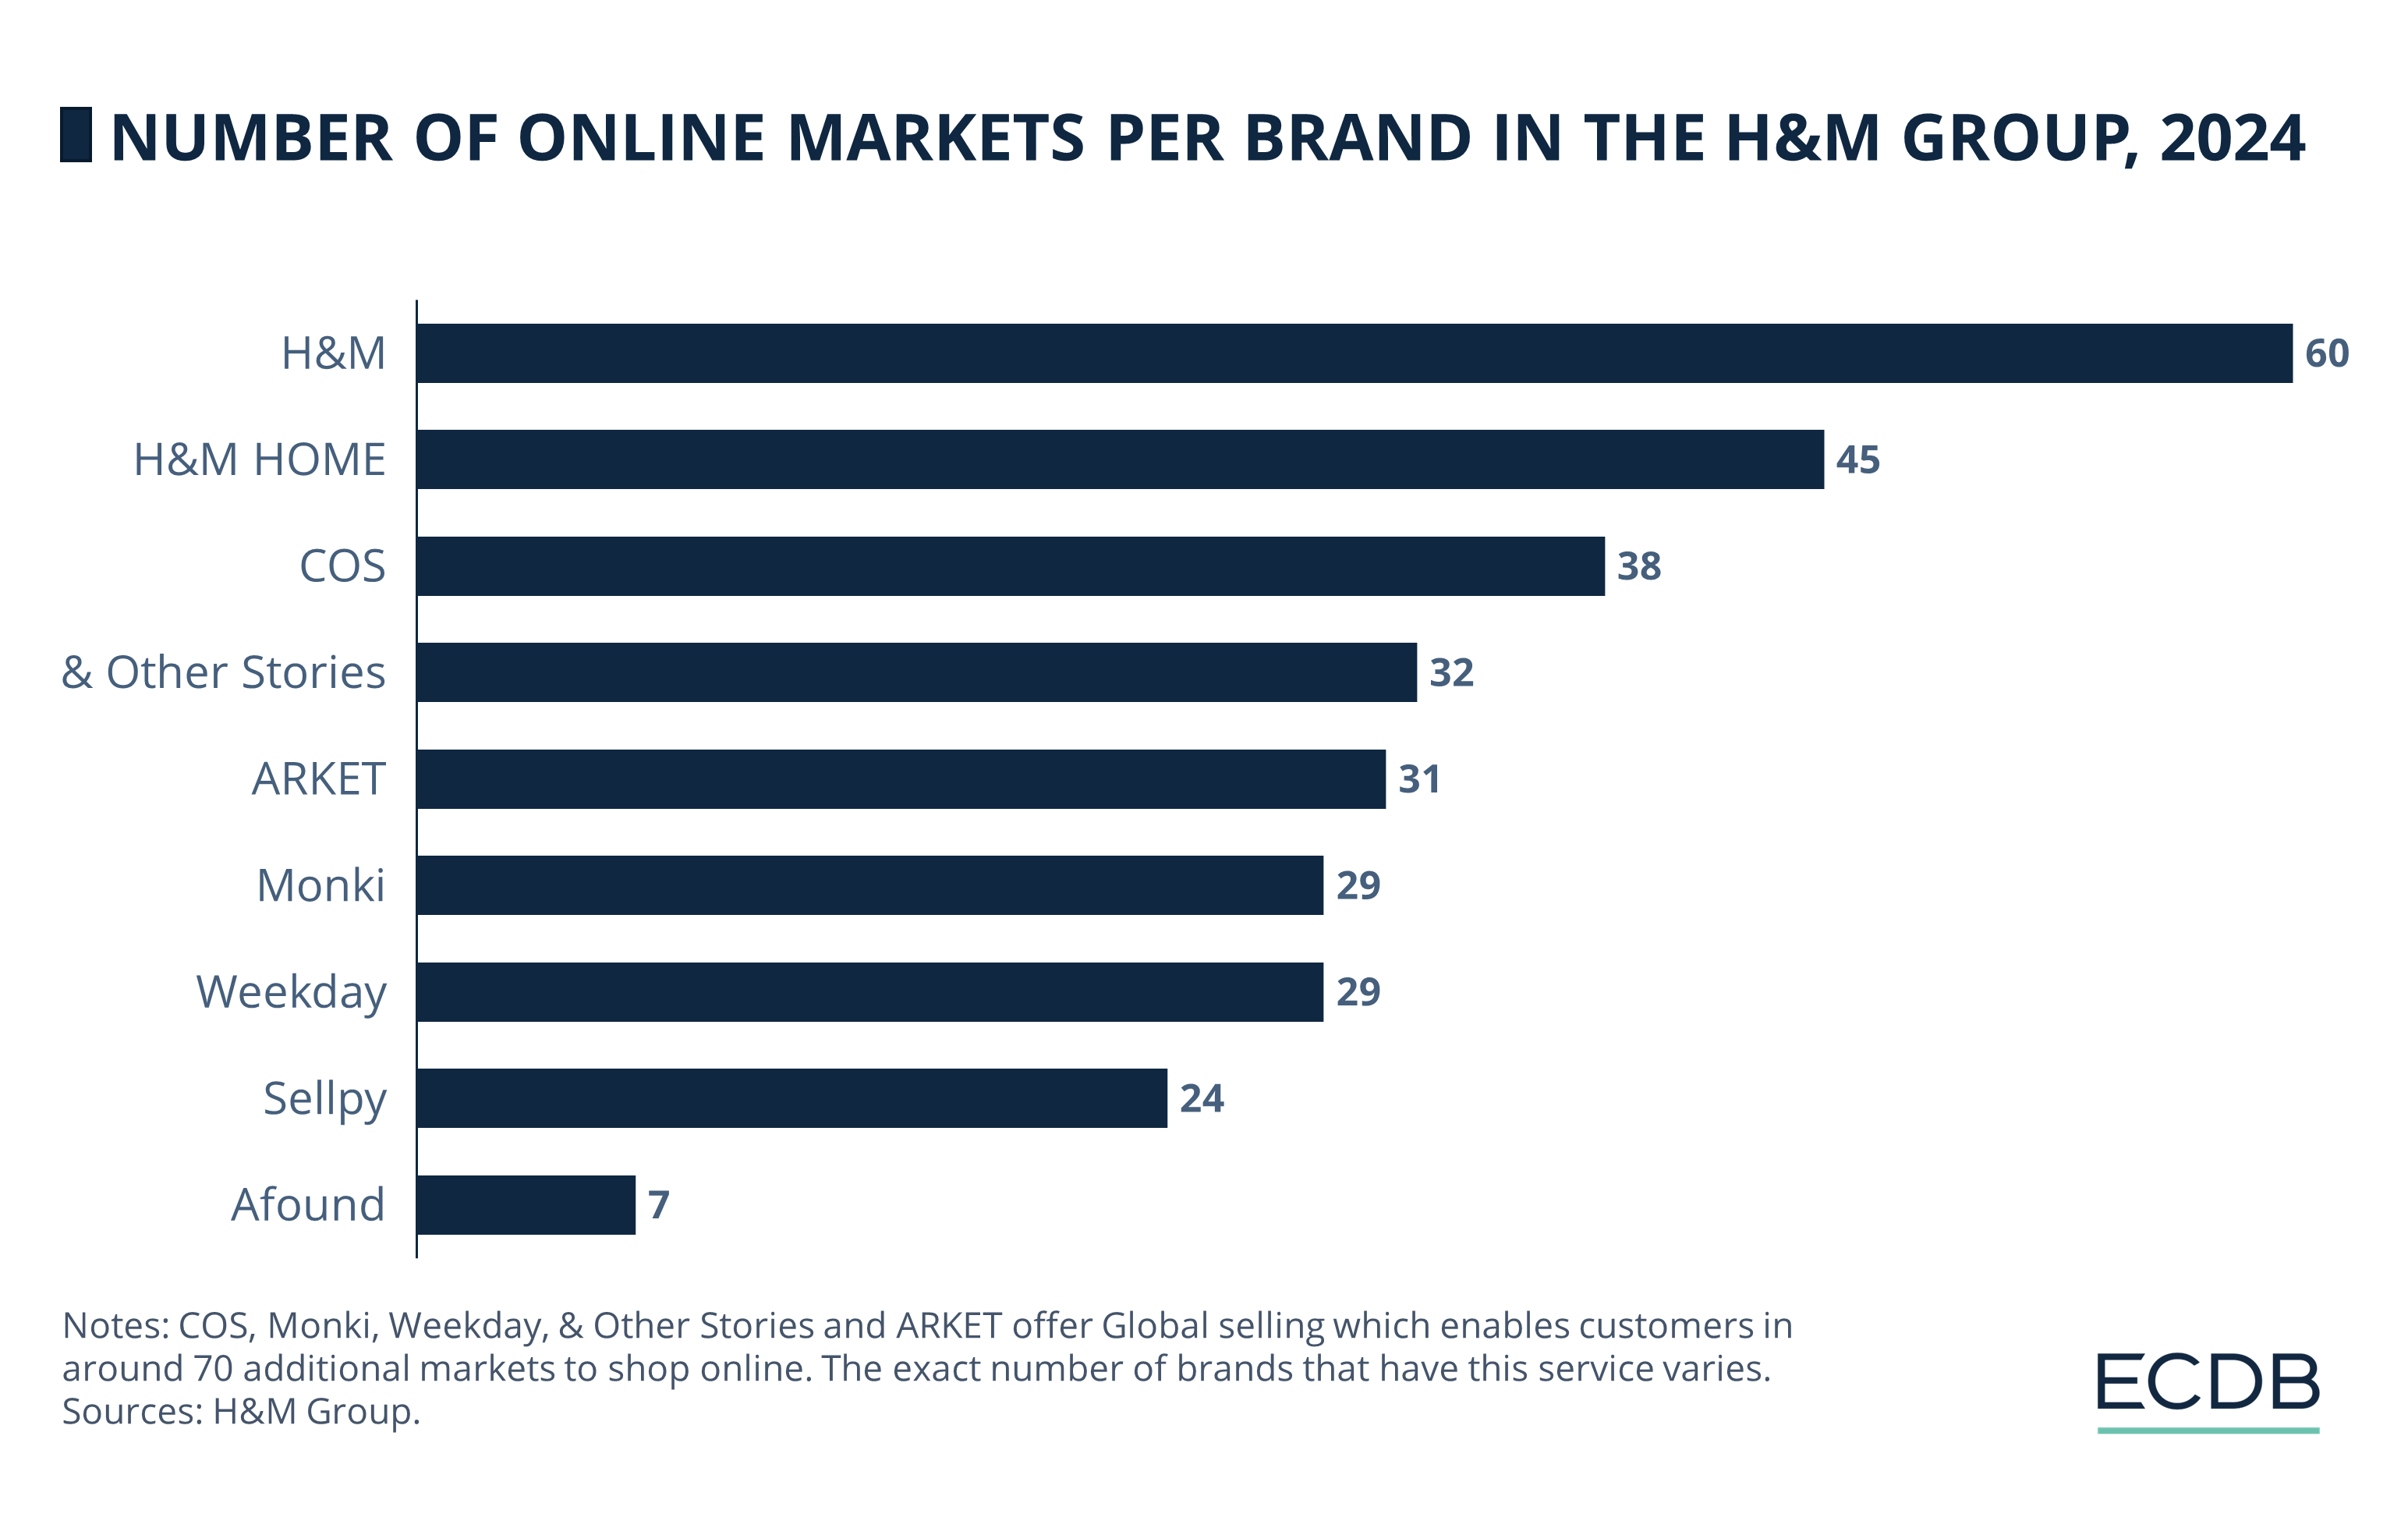 Number of Online Markets per Brand in the H&M Group, 2024